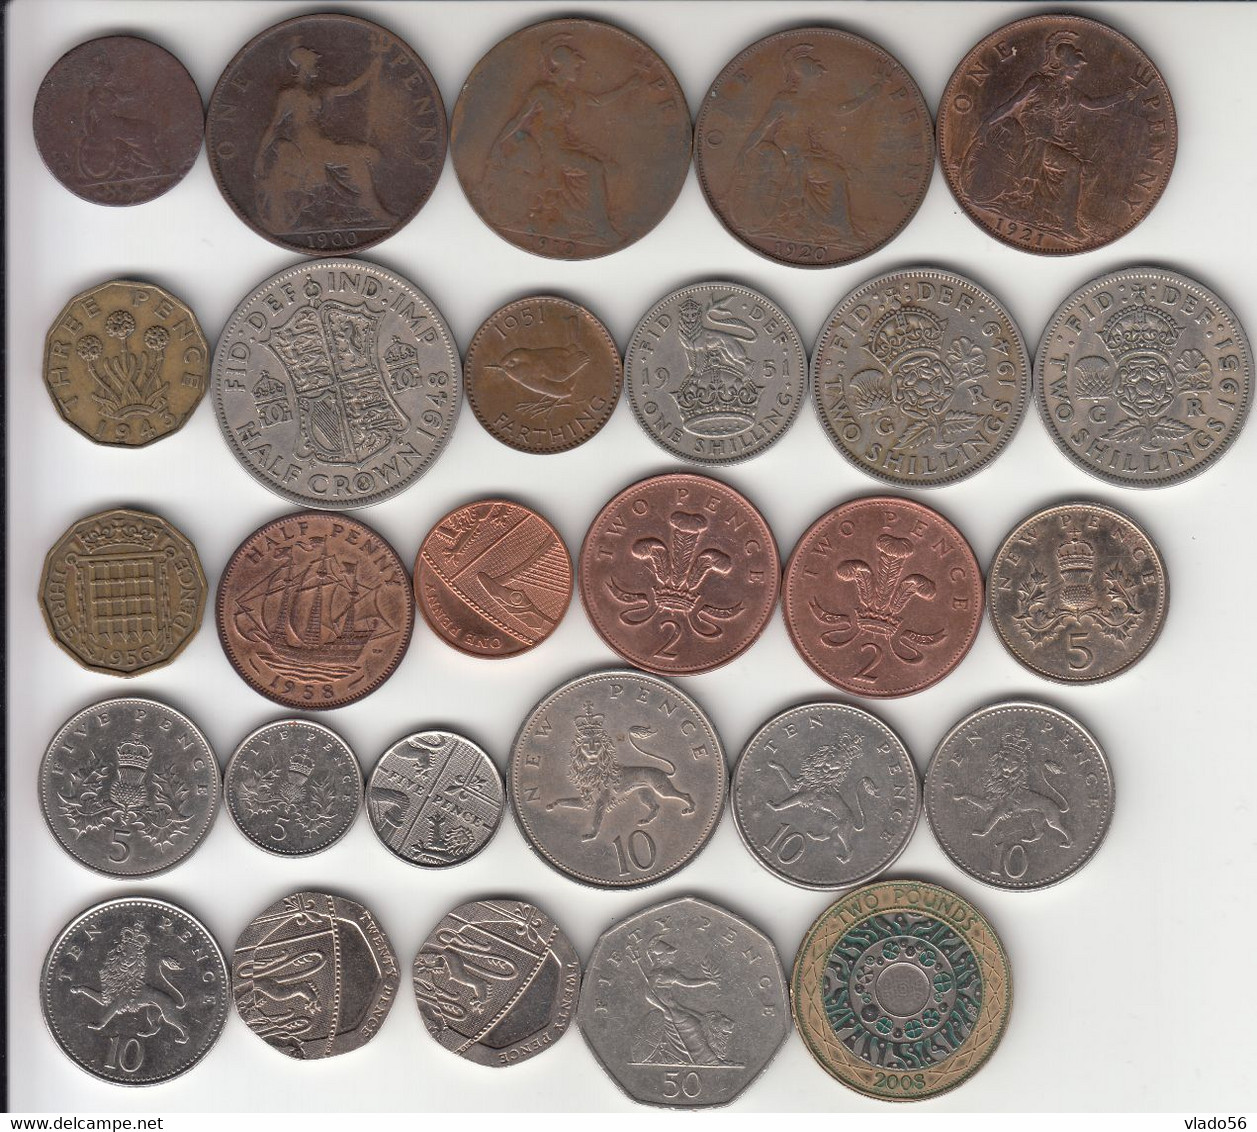 GREAT BRITAIN  - LOT 27 DIFFERENT COINS FROM  1 FARTHING 1847 UP TO  2 POUNDS 2008 ,  LM1.23 - Colecciones